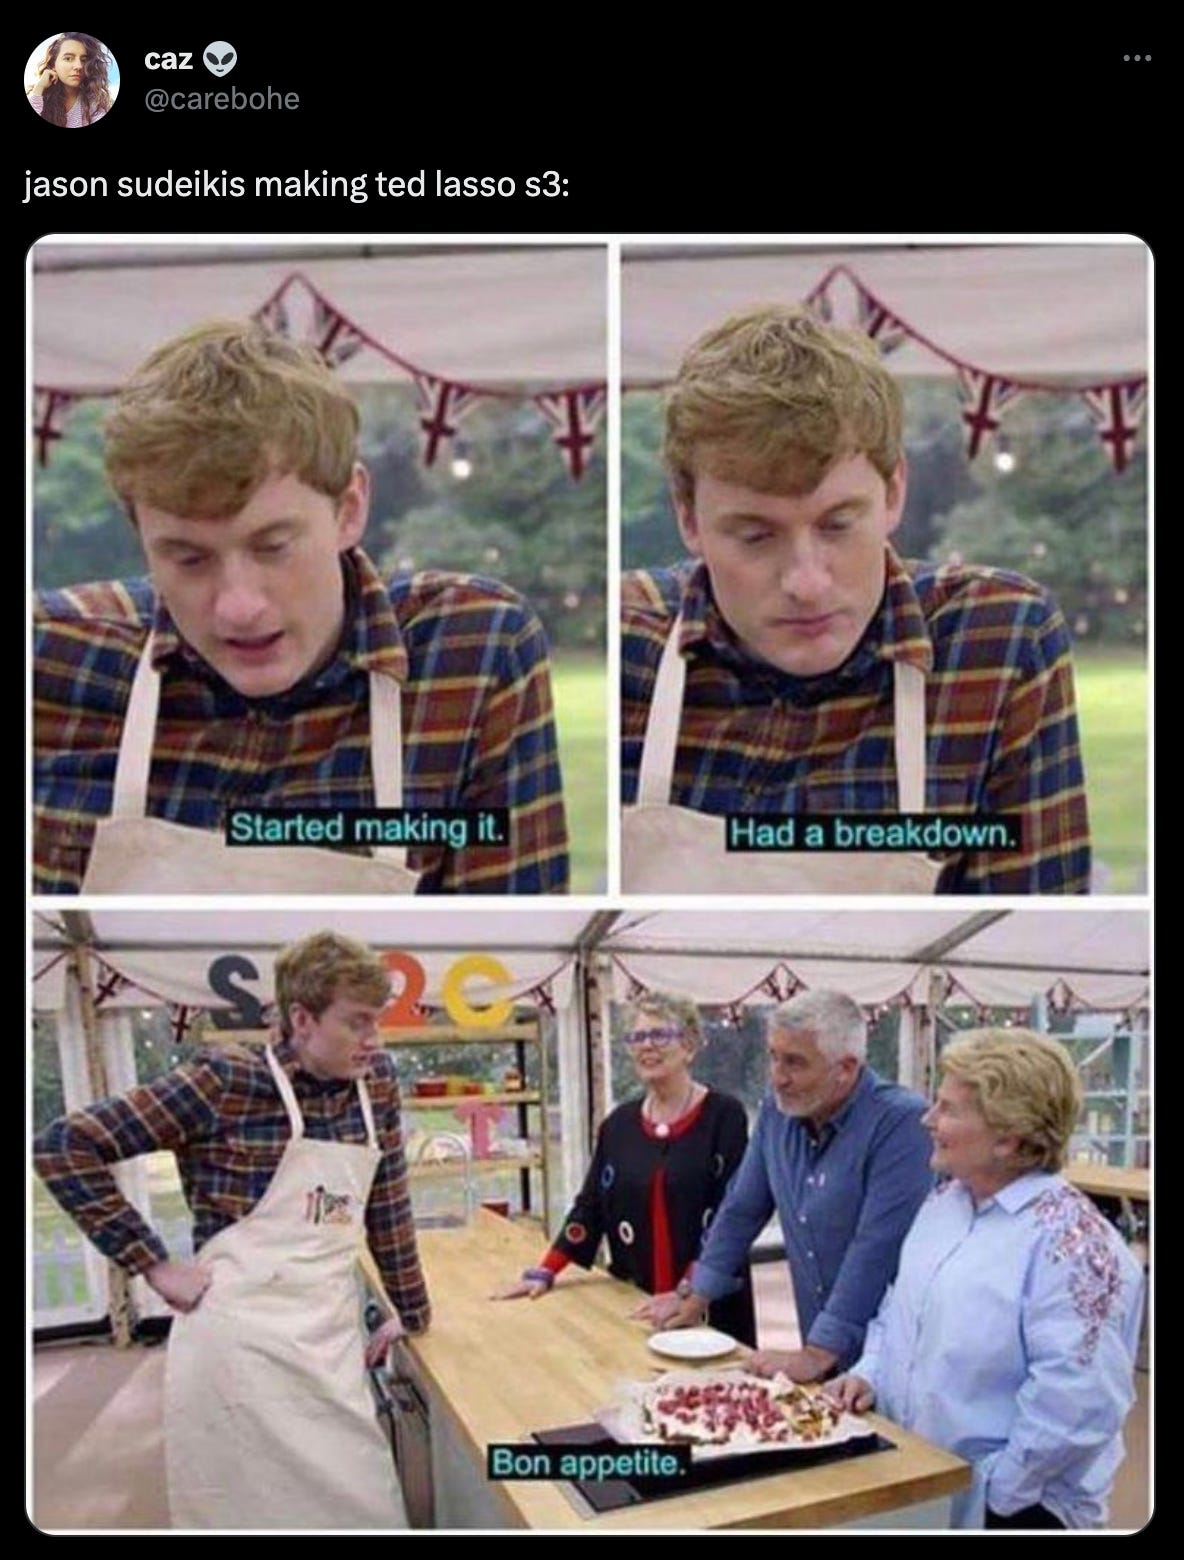 A tweet from @carebohe that reads "jason sudeikis making ted lasso s3:" and features the Great British Baking Show James Acaster meme where he says "Started making it. Had a breakdown. Bon appetit."